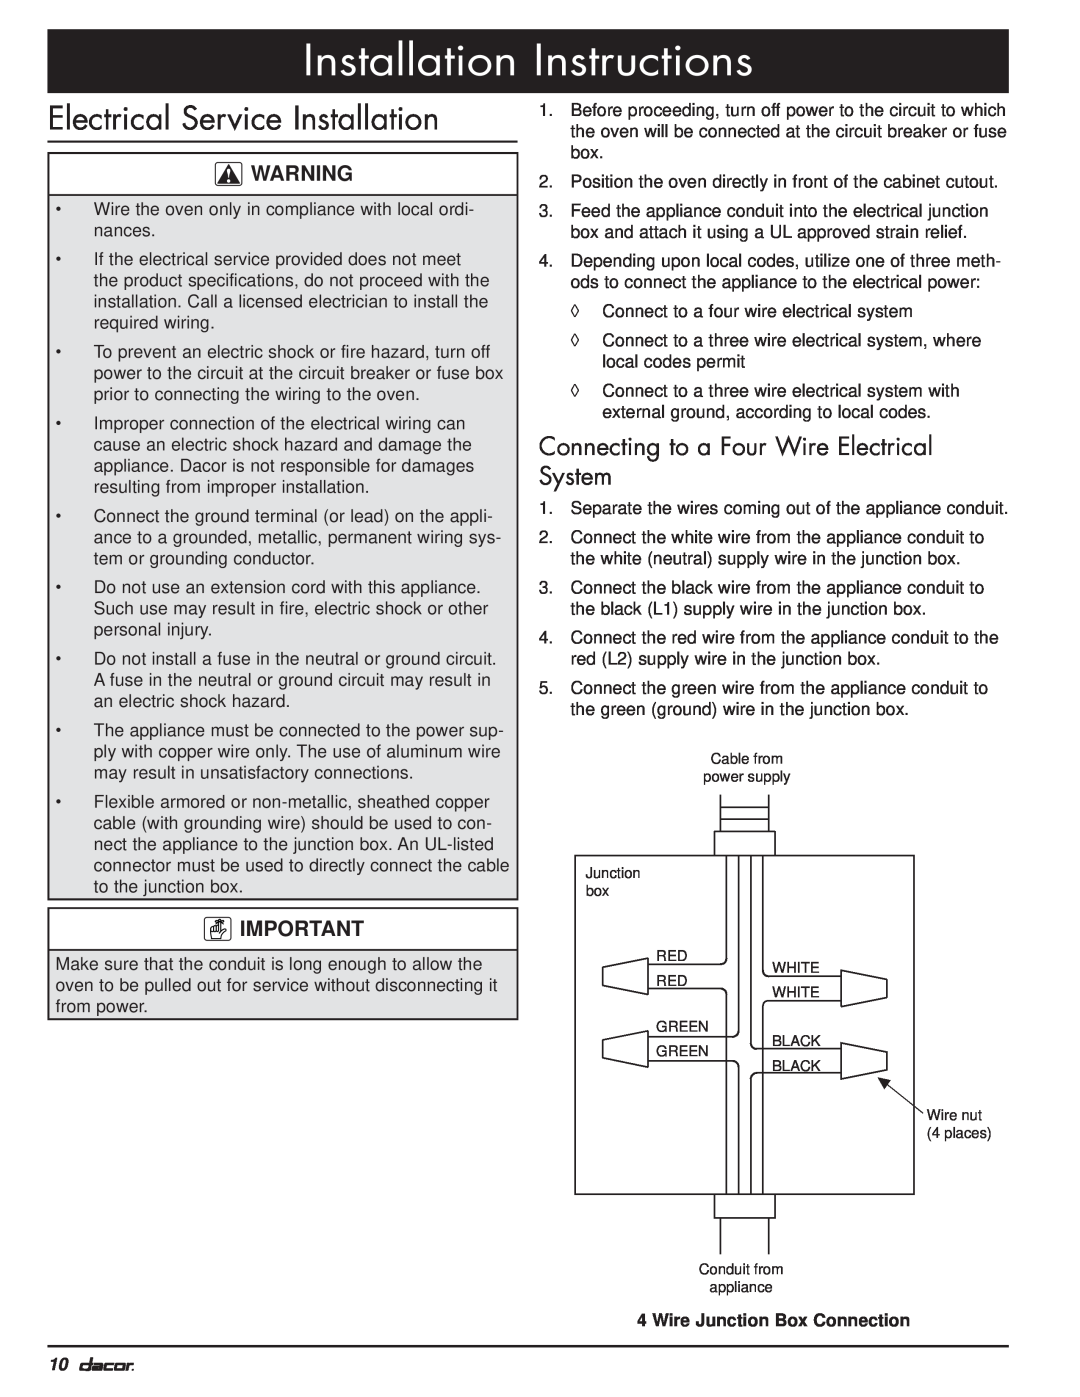 Dacor MO manual Electrical Service Installation, Connecting to a Four Wire Electrical System, Installation Instructions 